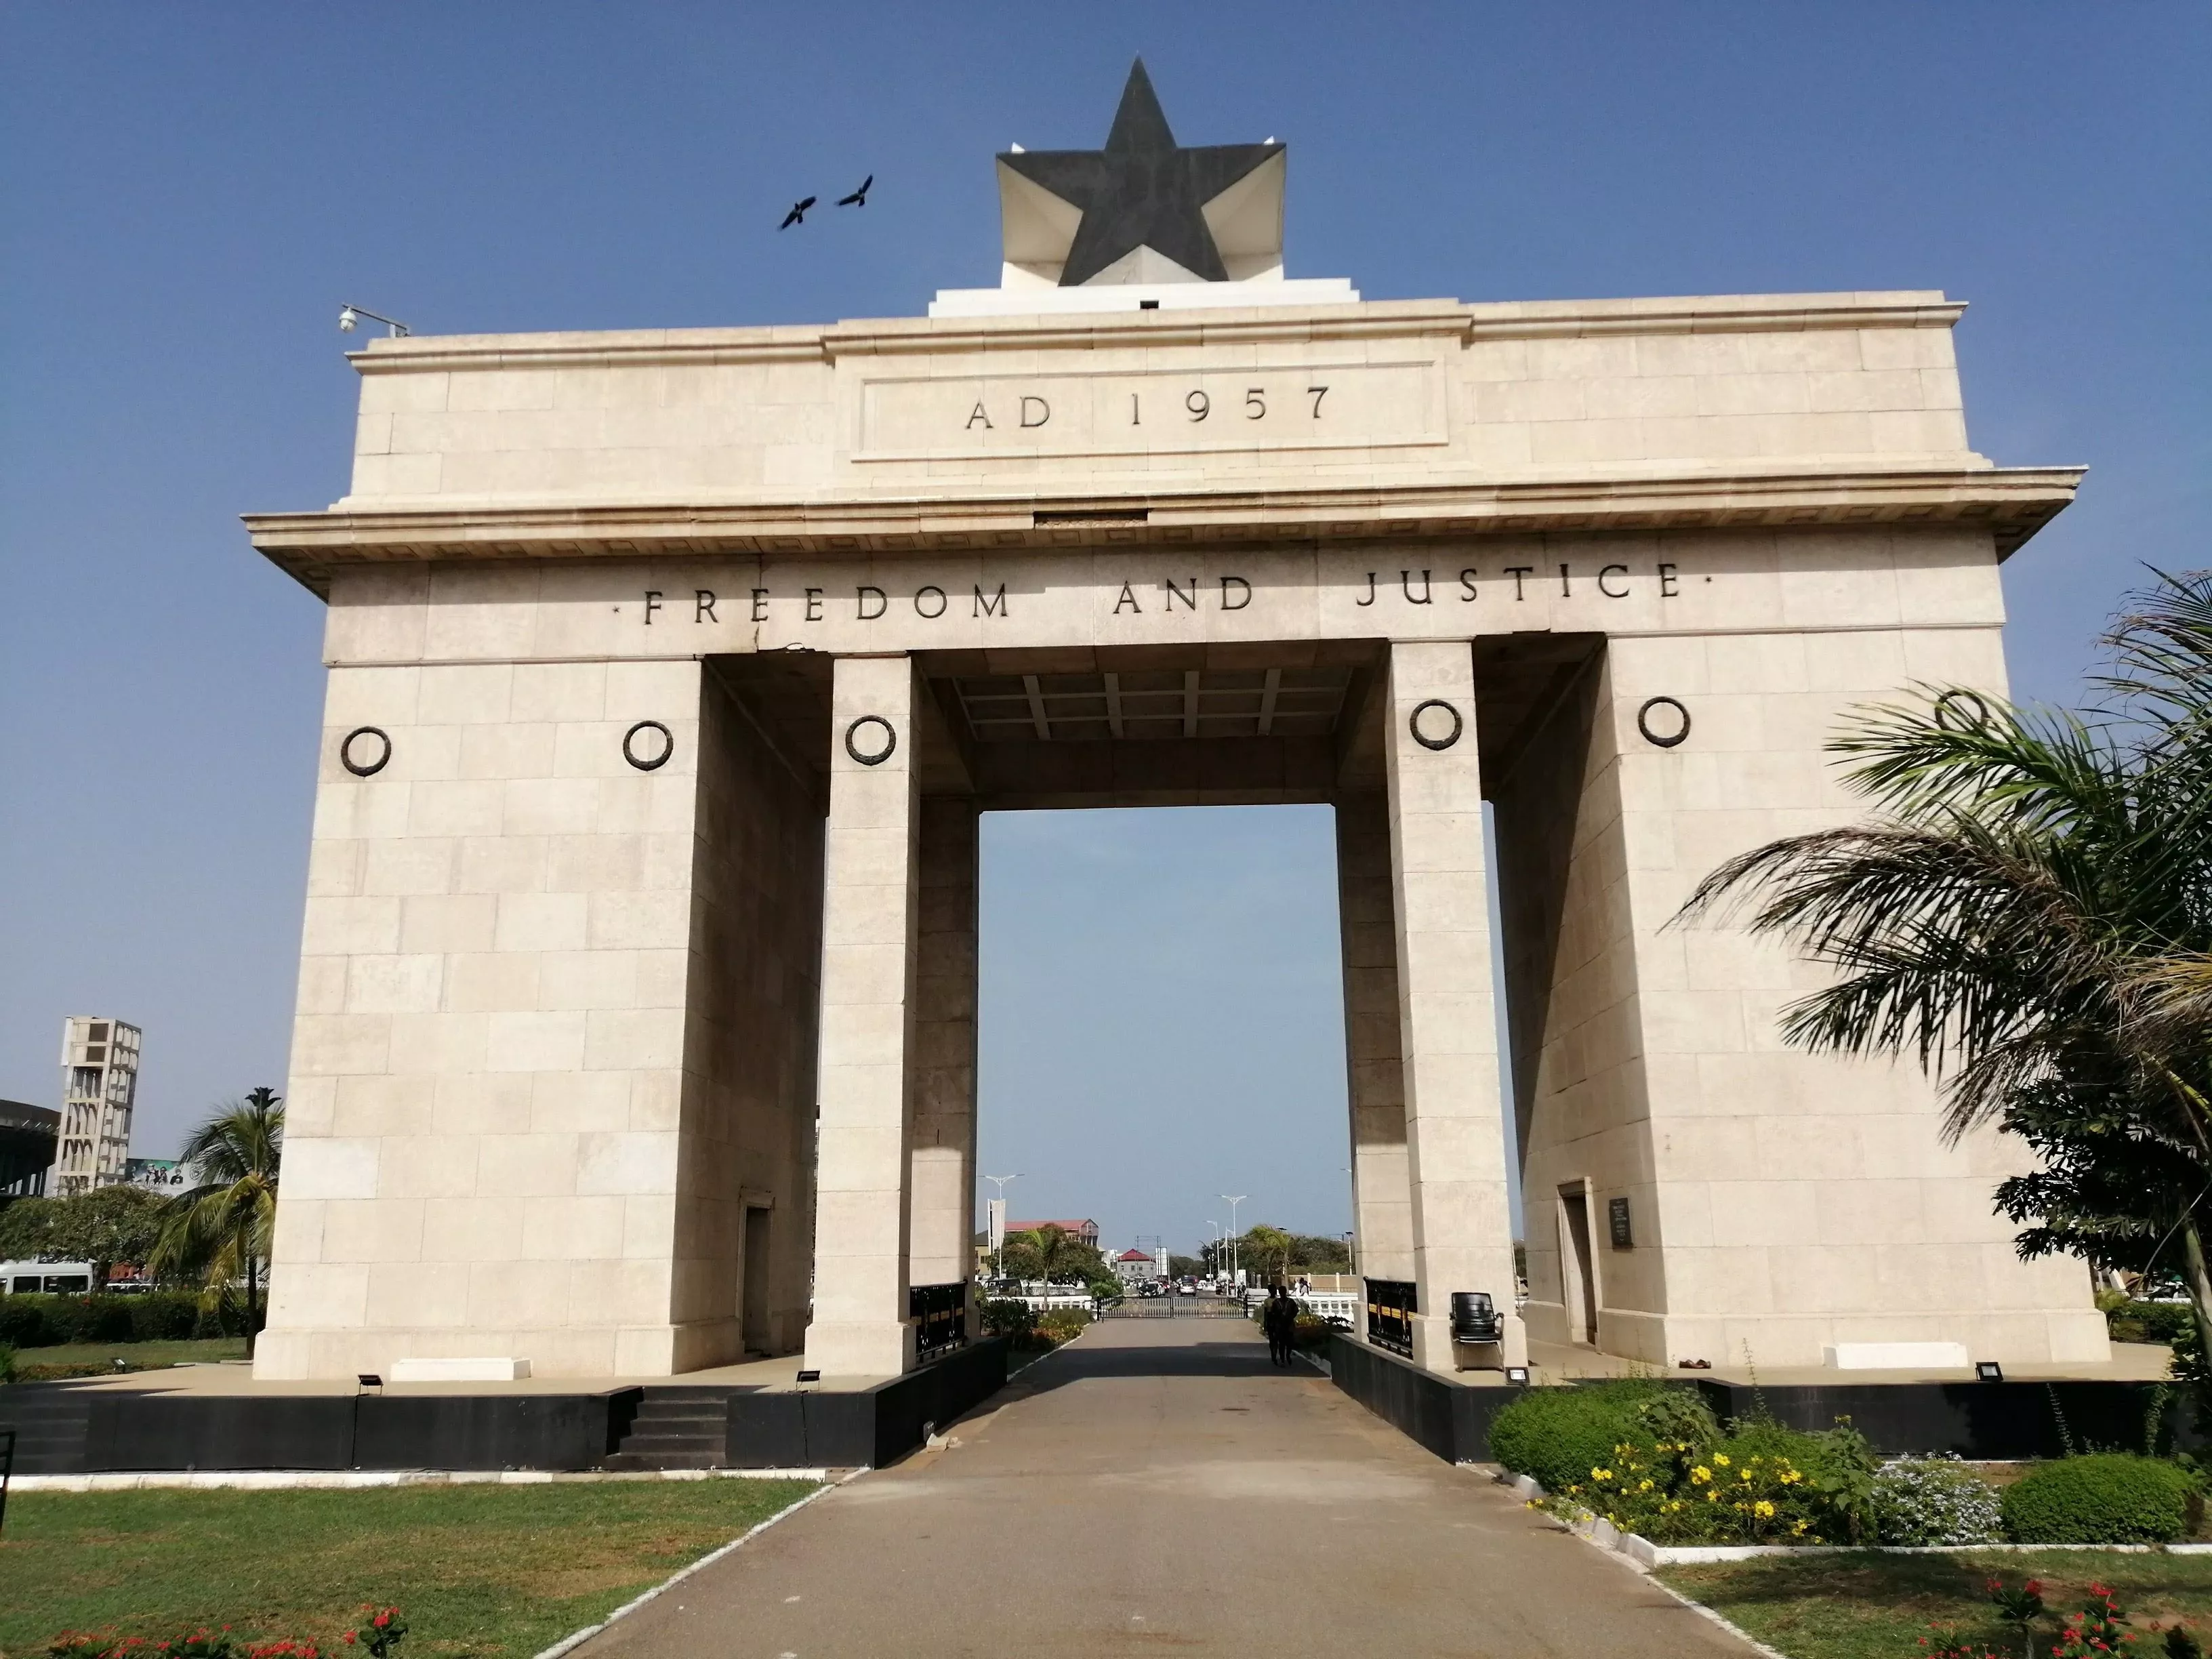 Black Star Square in Ghana, Africa | Architecture - Rated 3.7